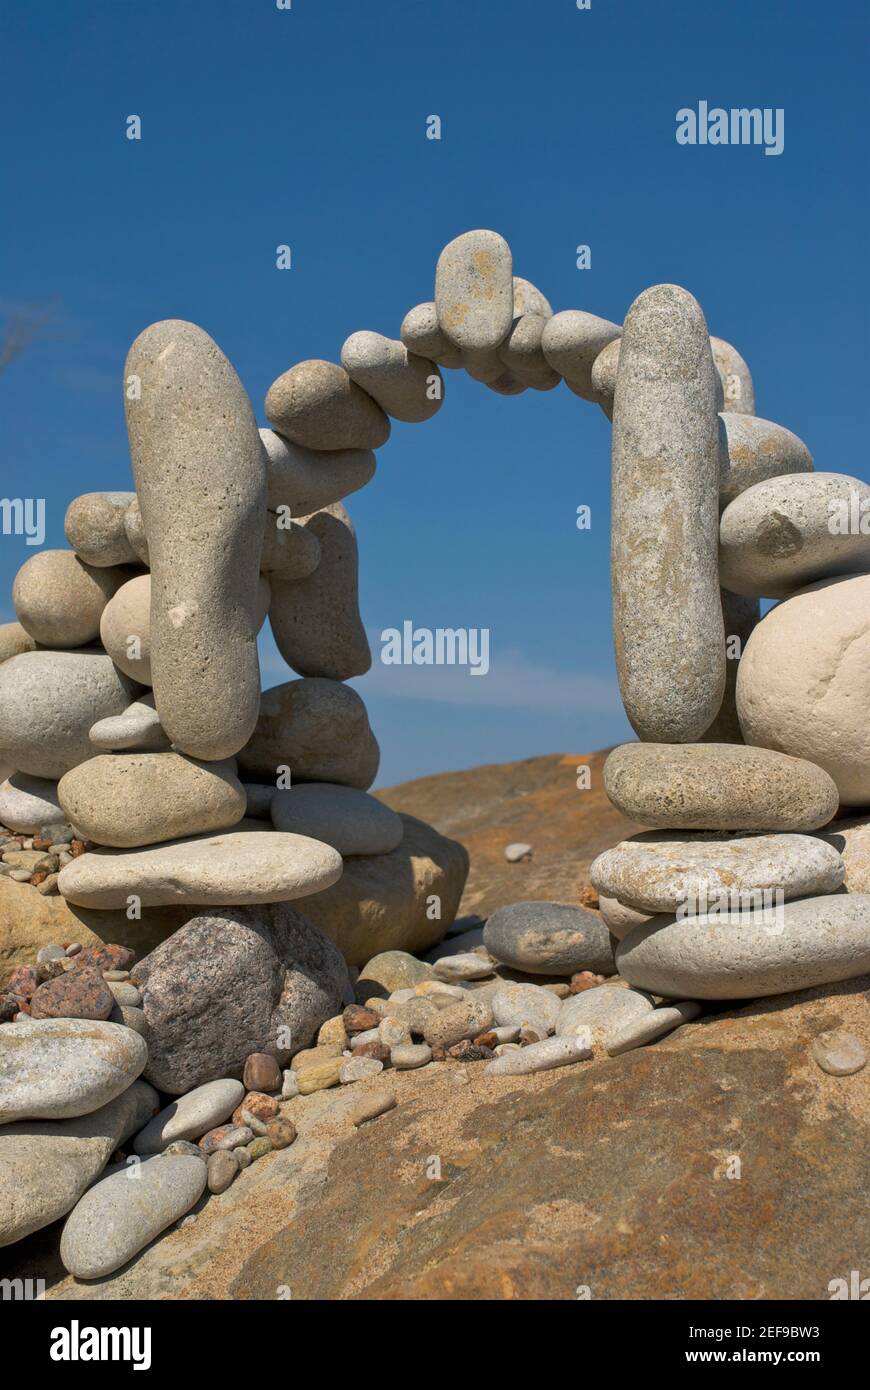 Stones arranged in an arch shape Stock Photo